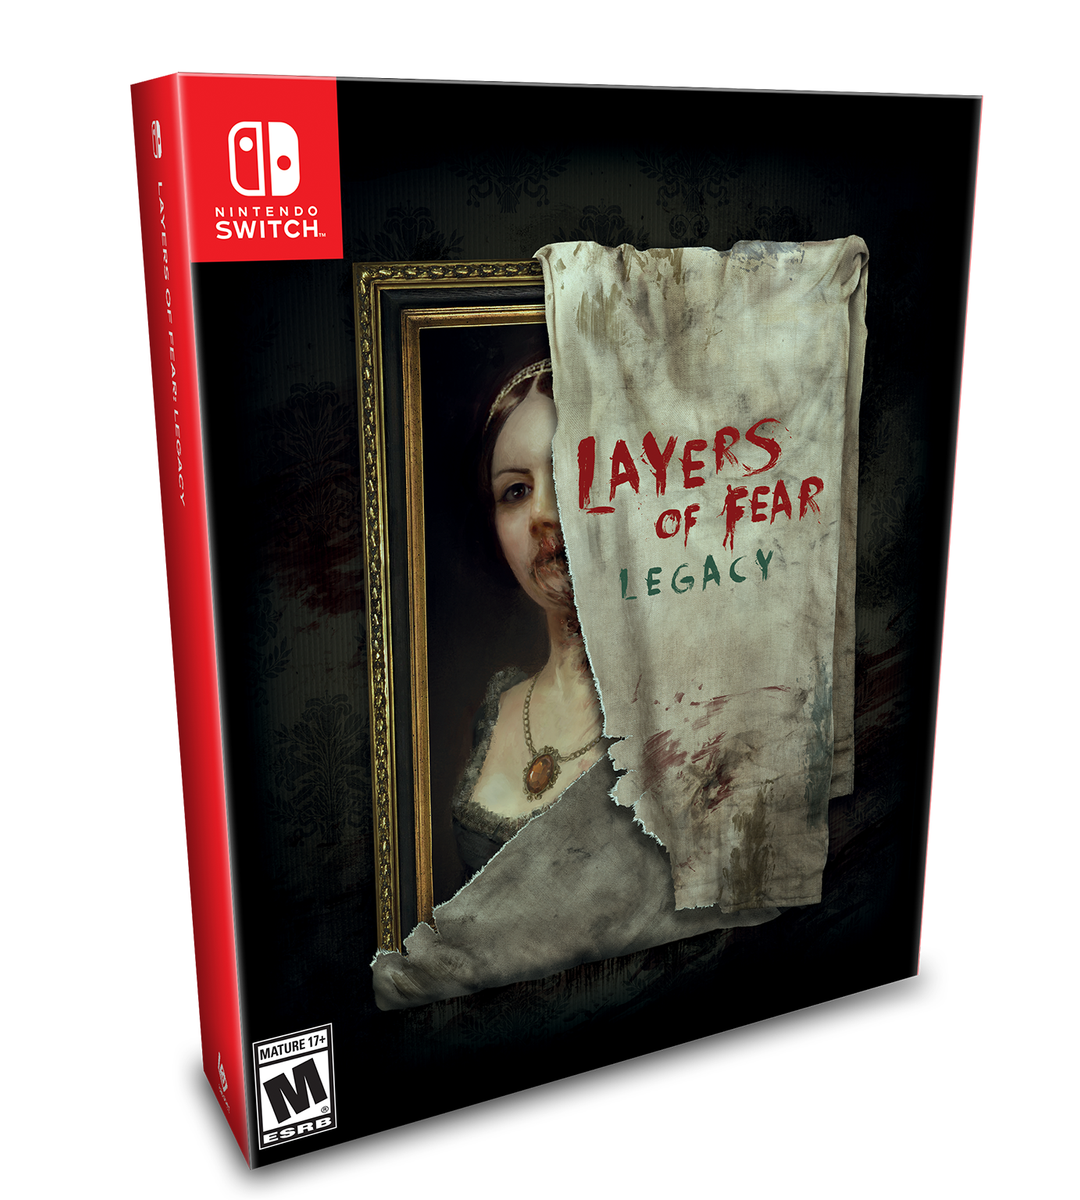 Limited Run Games on X: In 45 minutes Layers of Fear for Nintendo Switch &  Sony PlayStation 4 will be on sale! 10AM ET only at   If you like horror games